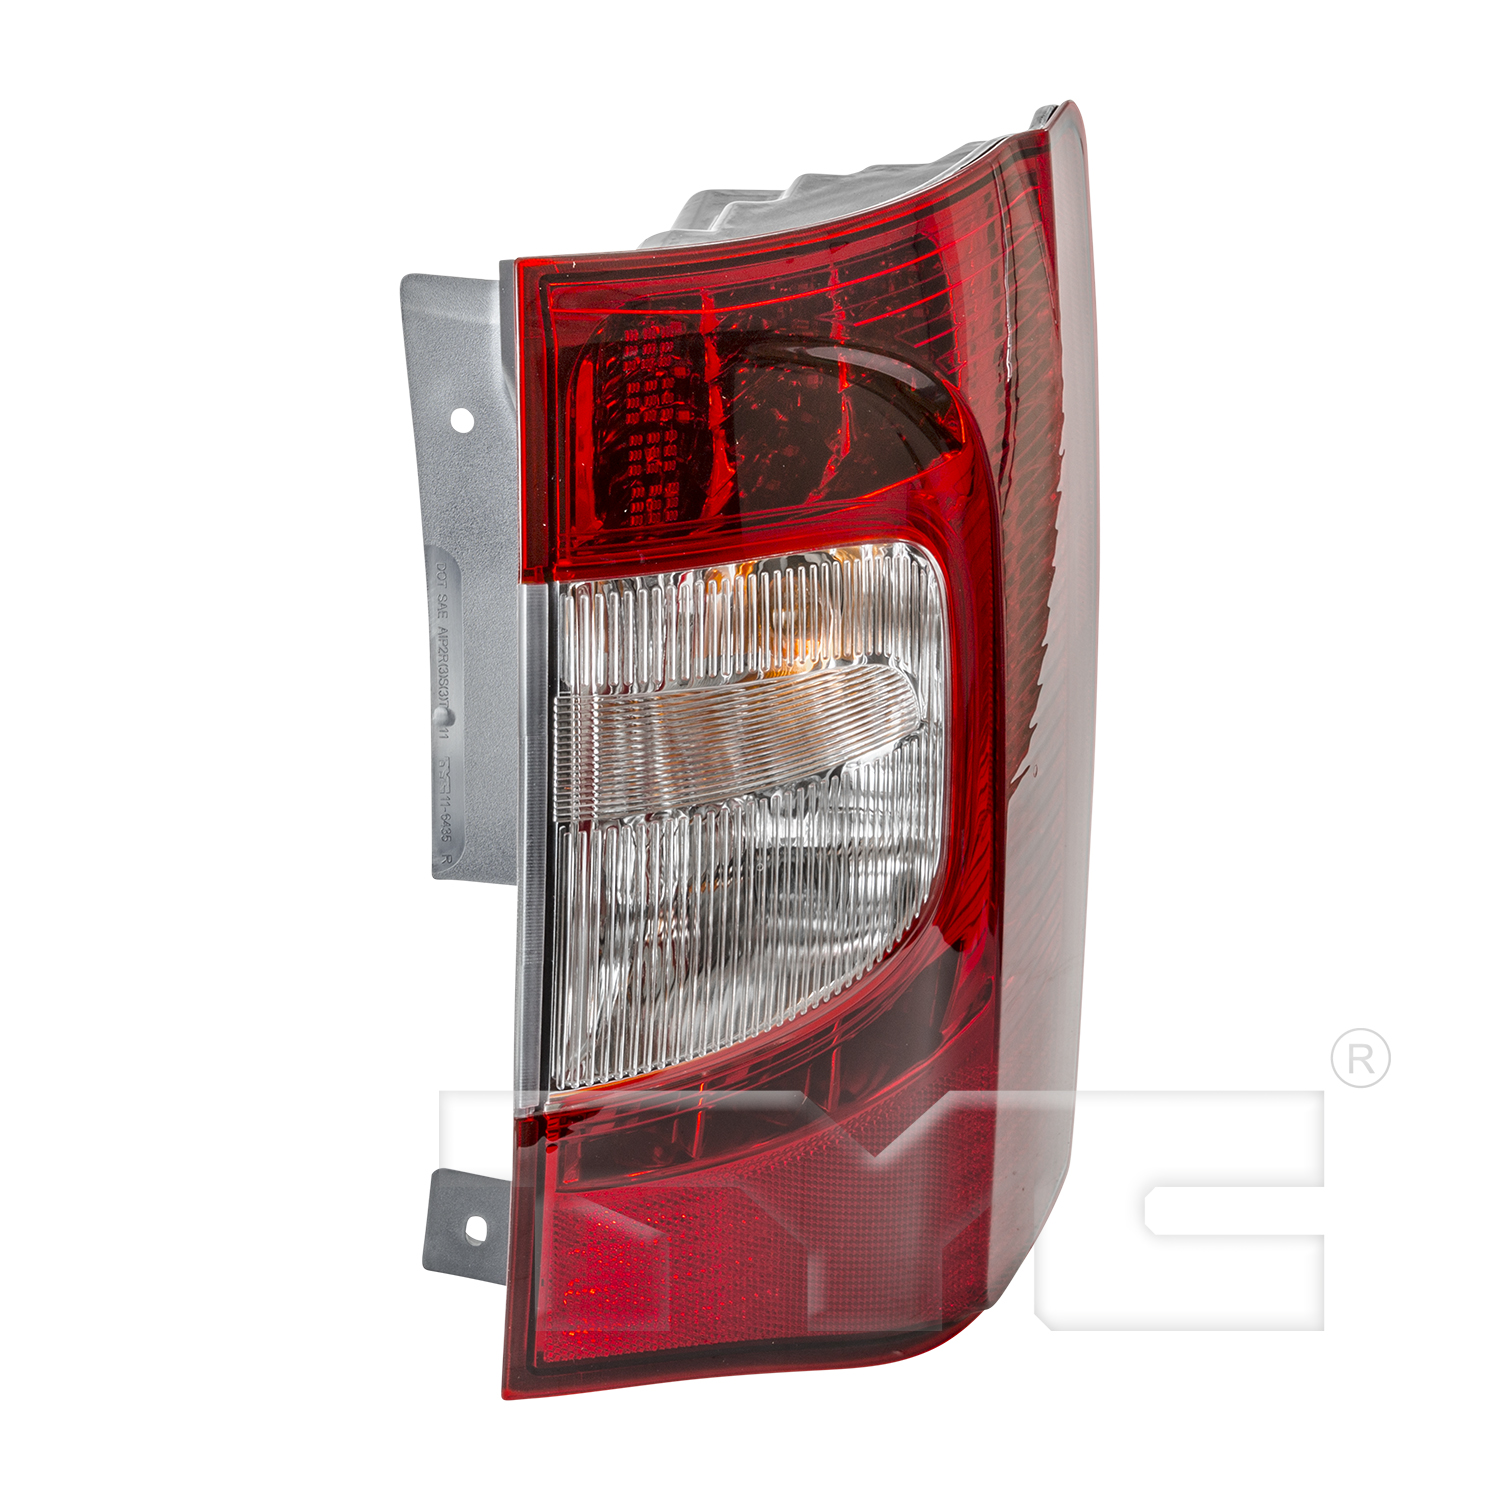 Aftermarket TAILLIGHTS for CHRYSLER - TOWN & COUNTRY, TOWN & COUNTRY,11-16,RT Taillamp assy